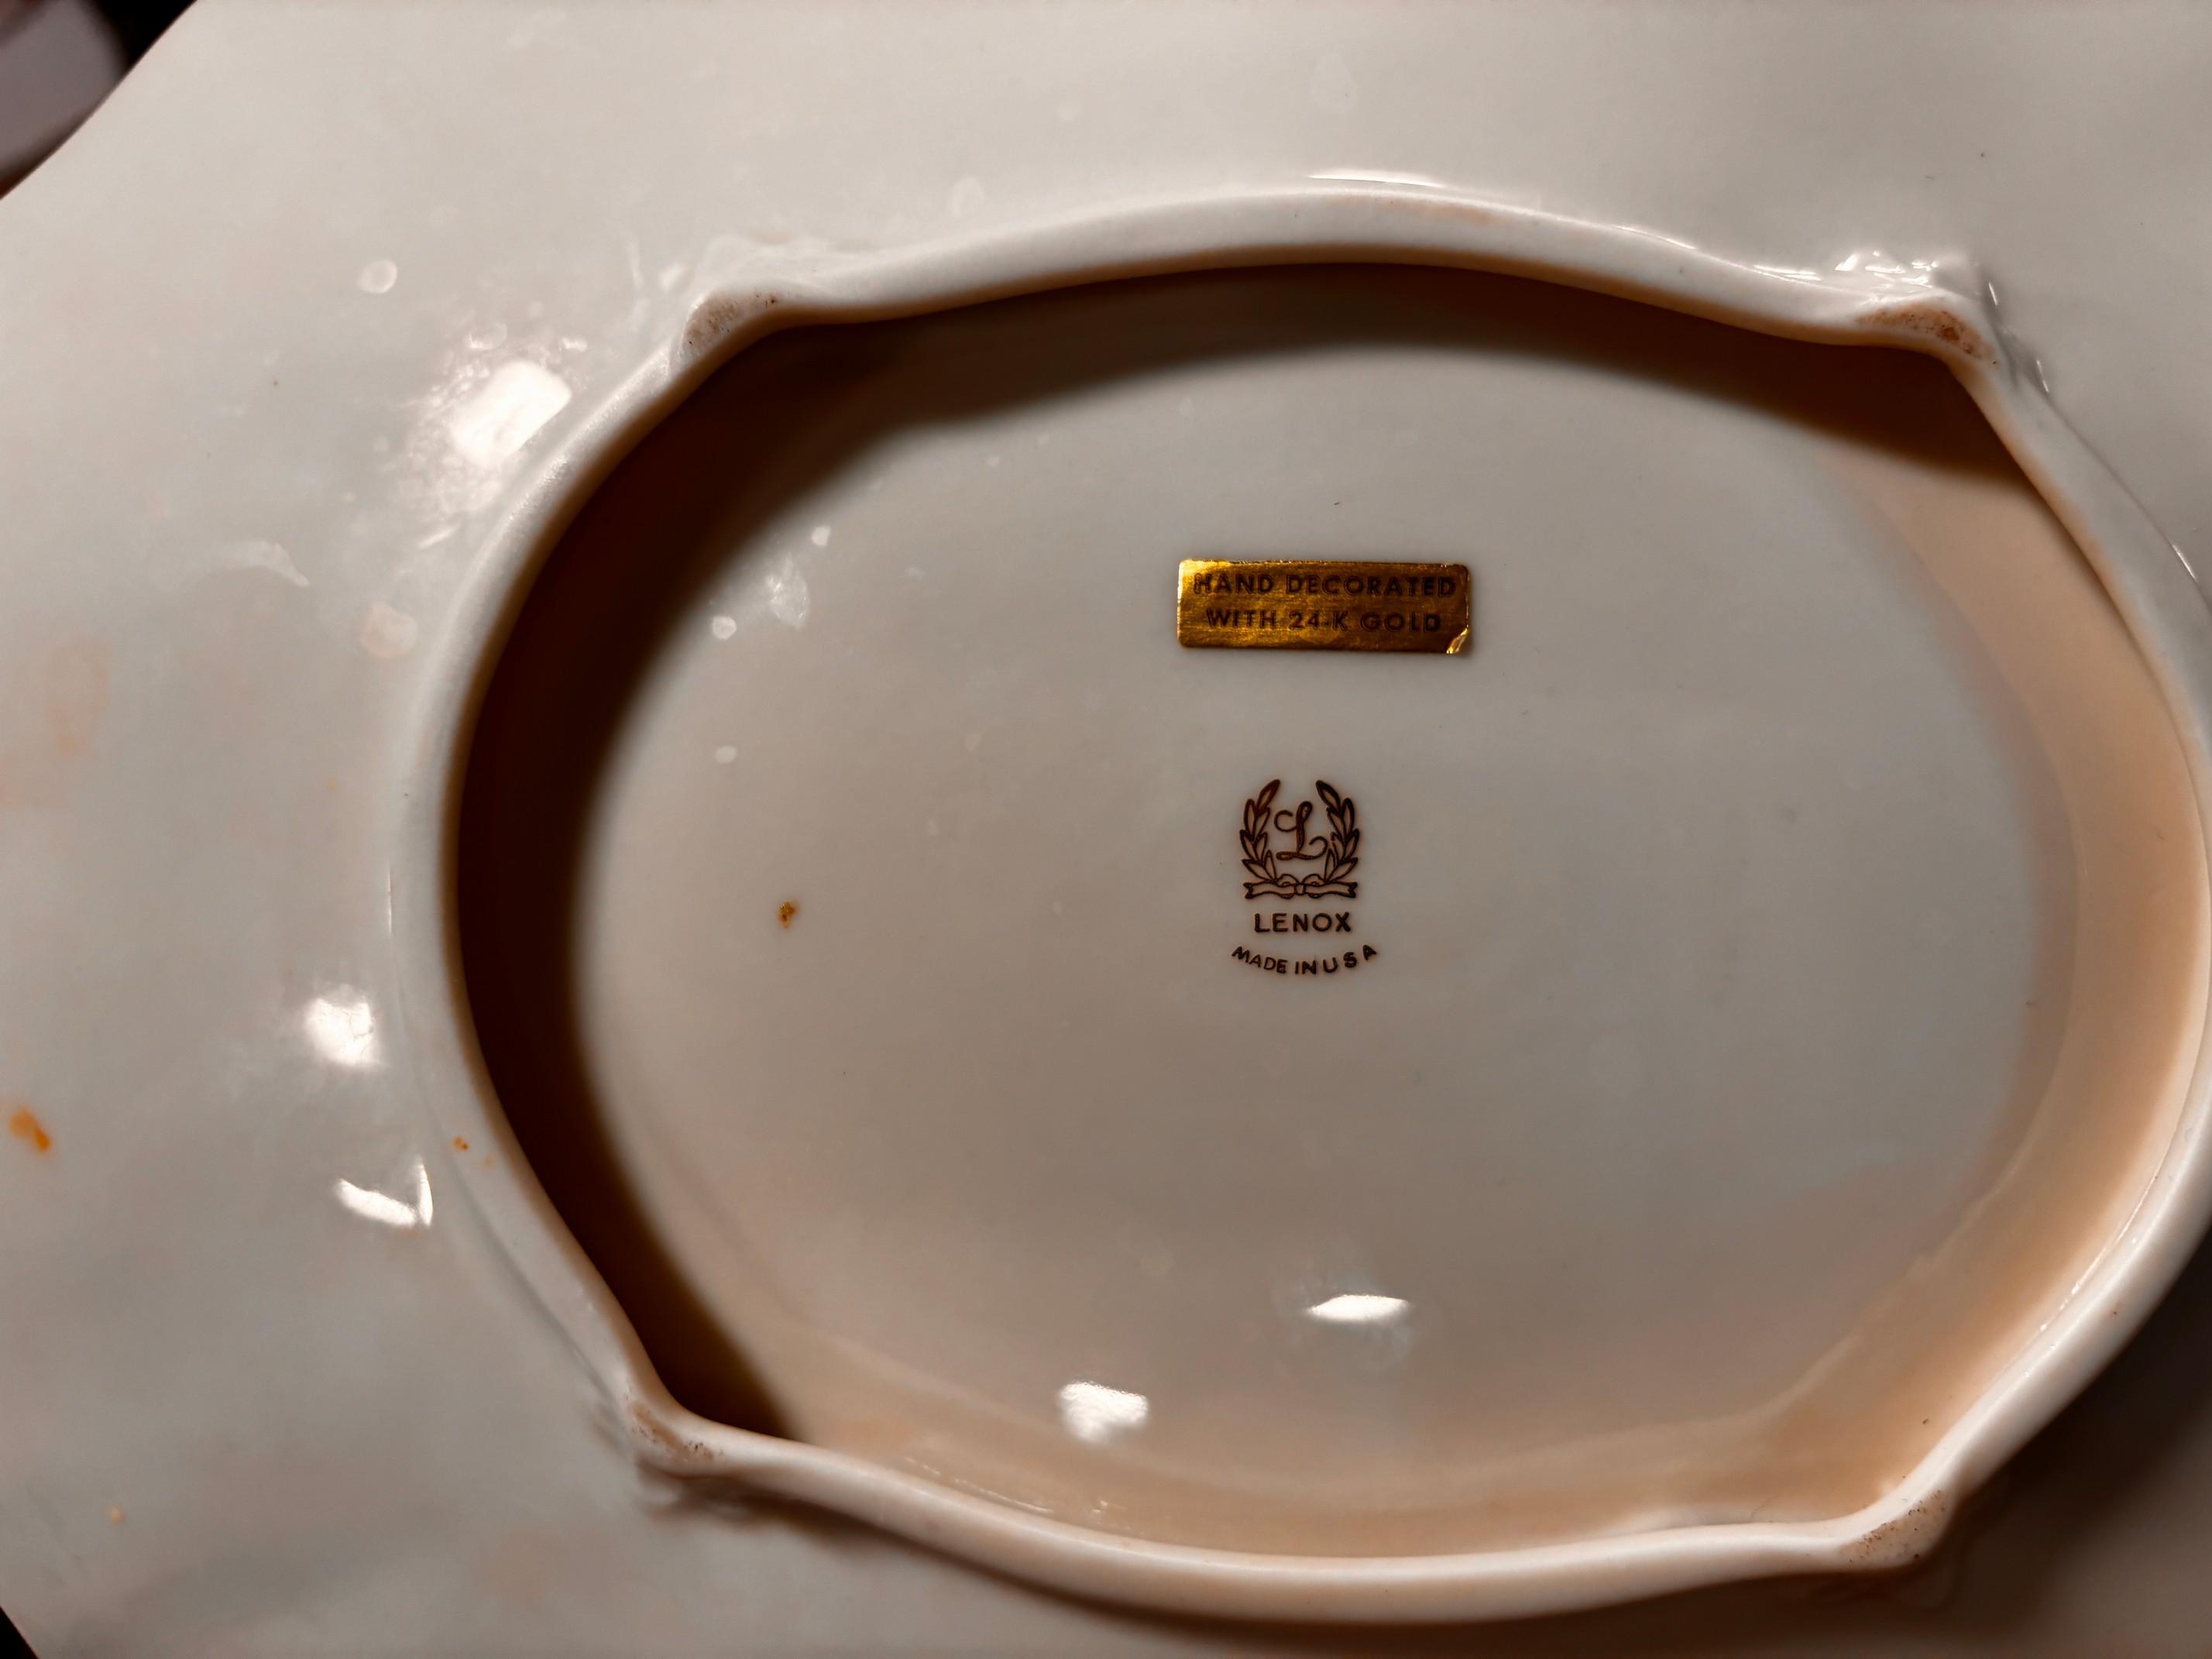 18" LENOX Serving Dish W/ Gold Accent - Excellent Condition W/ No Cracks or Breaks